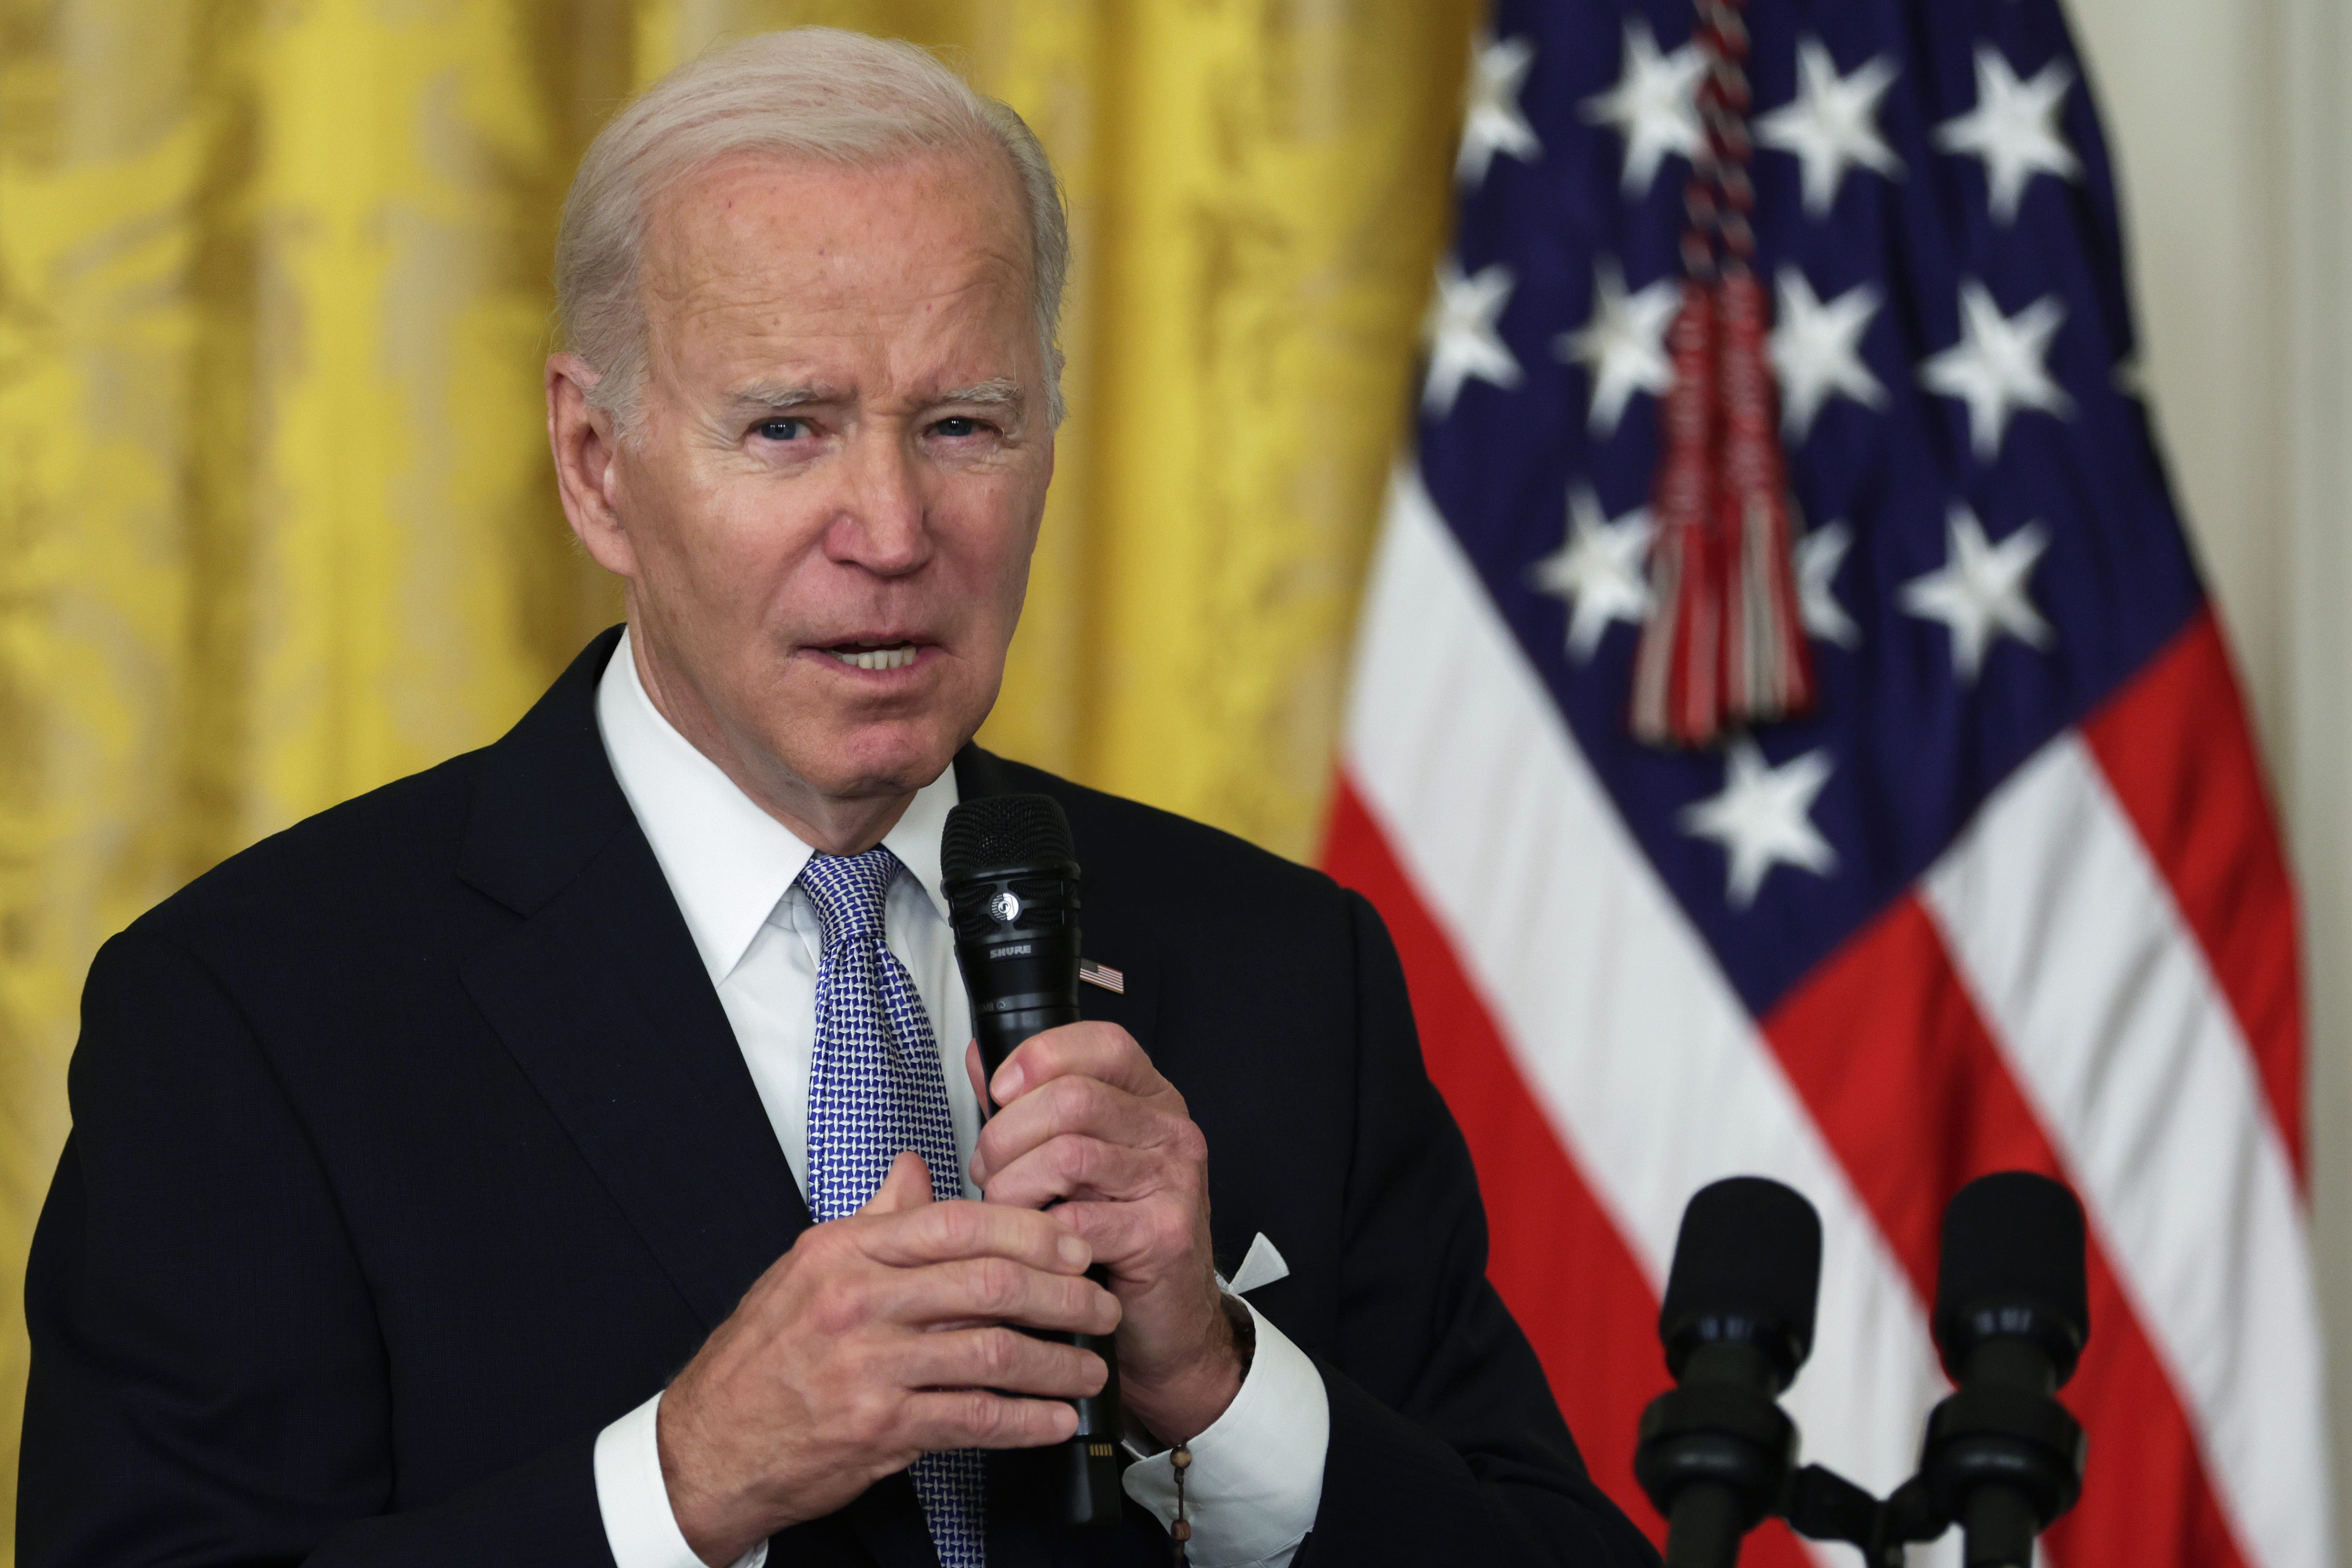 Revelations grow on Joe Biden's handling of classified documents; here's what we know so far